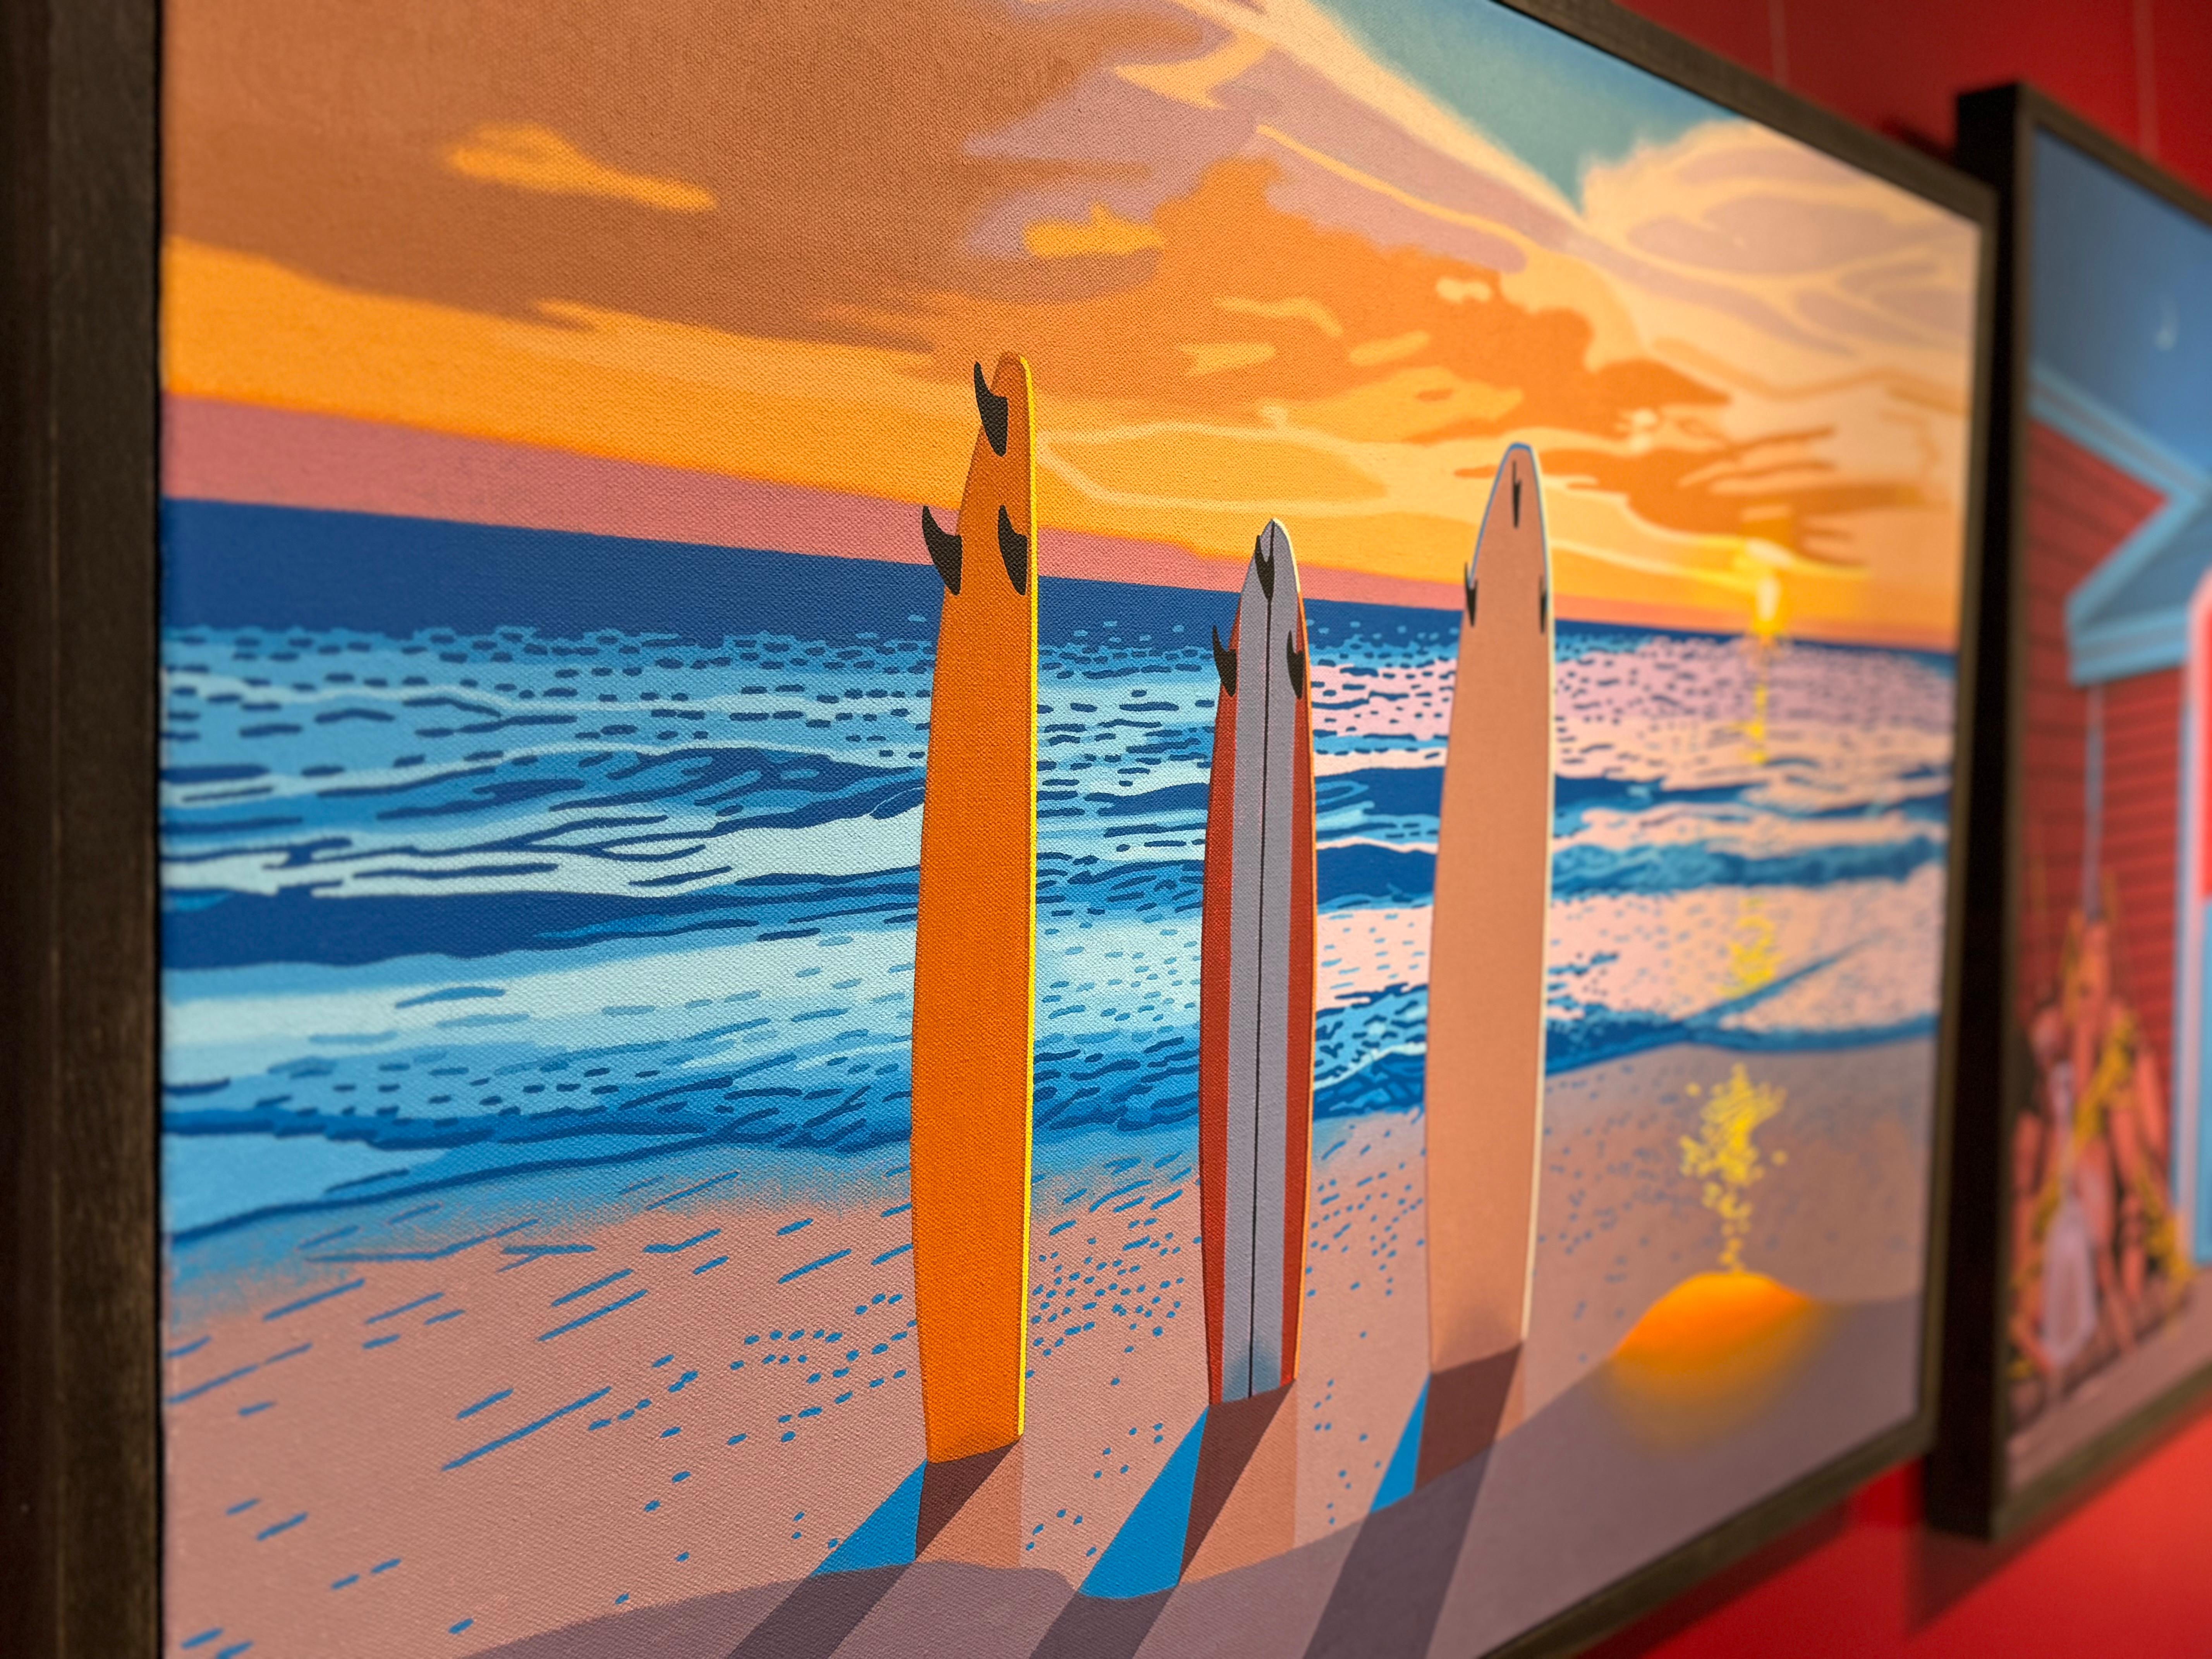 “Dawn Patrol” illustrative oil painting depicting surf boards and horizon For Sale 3